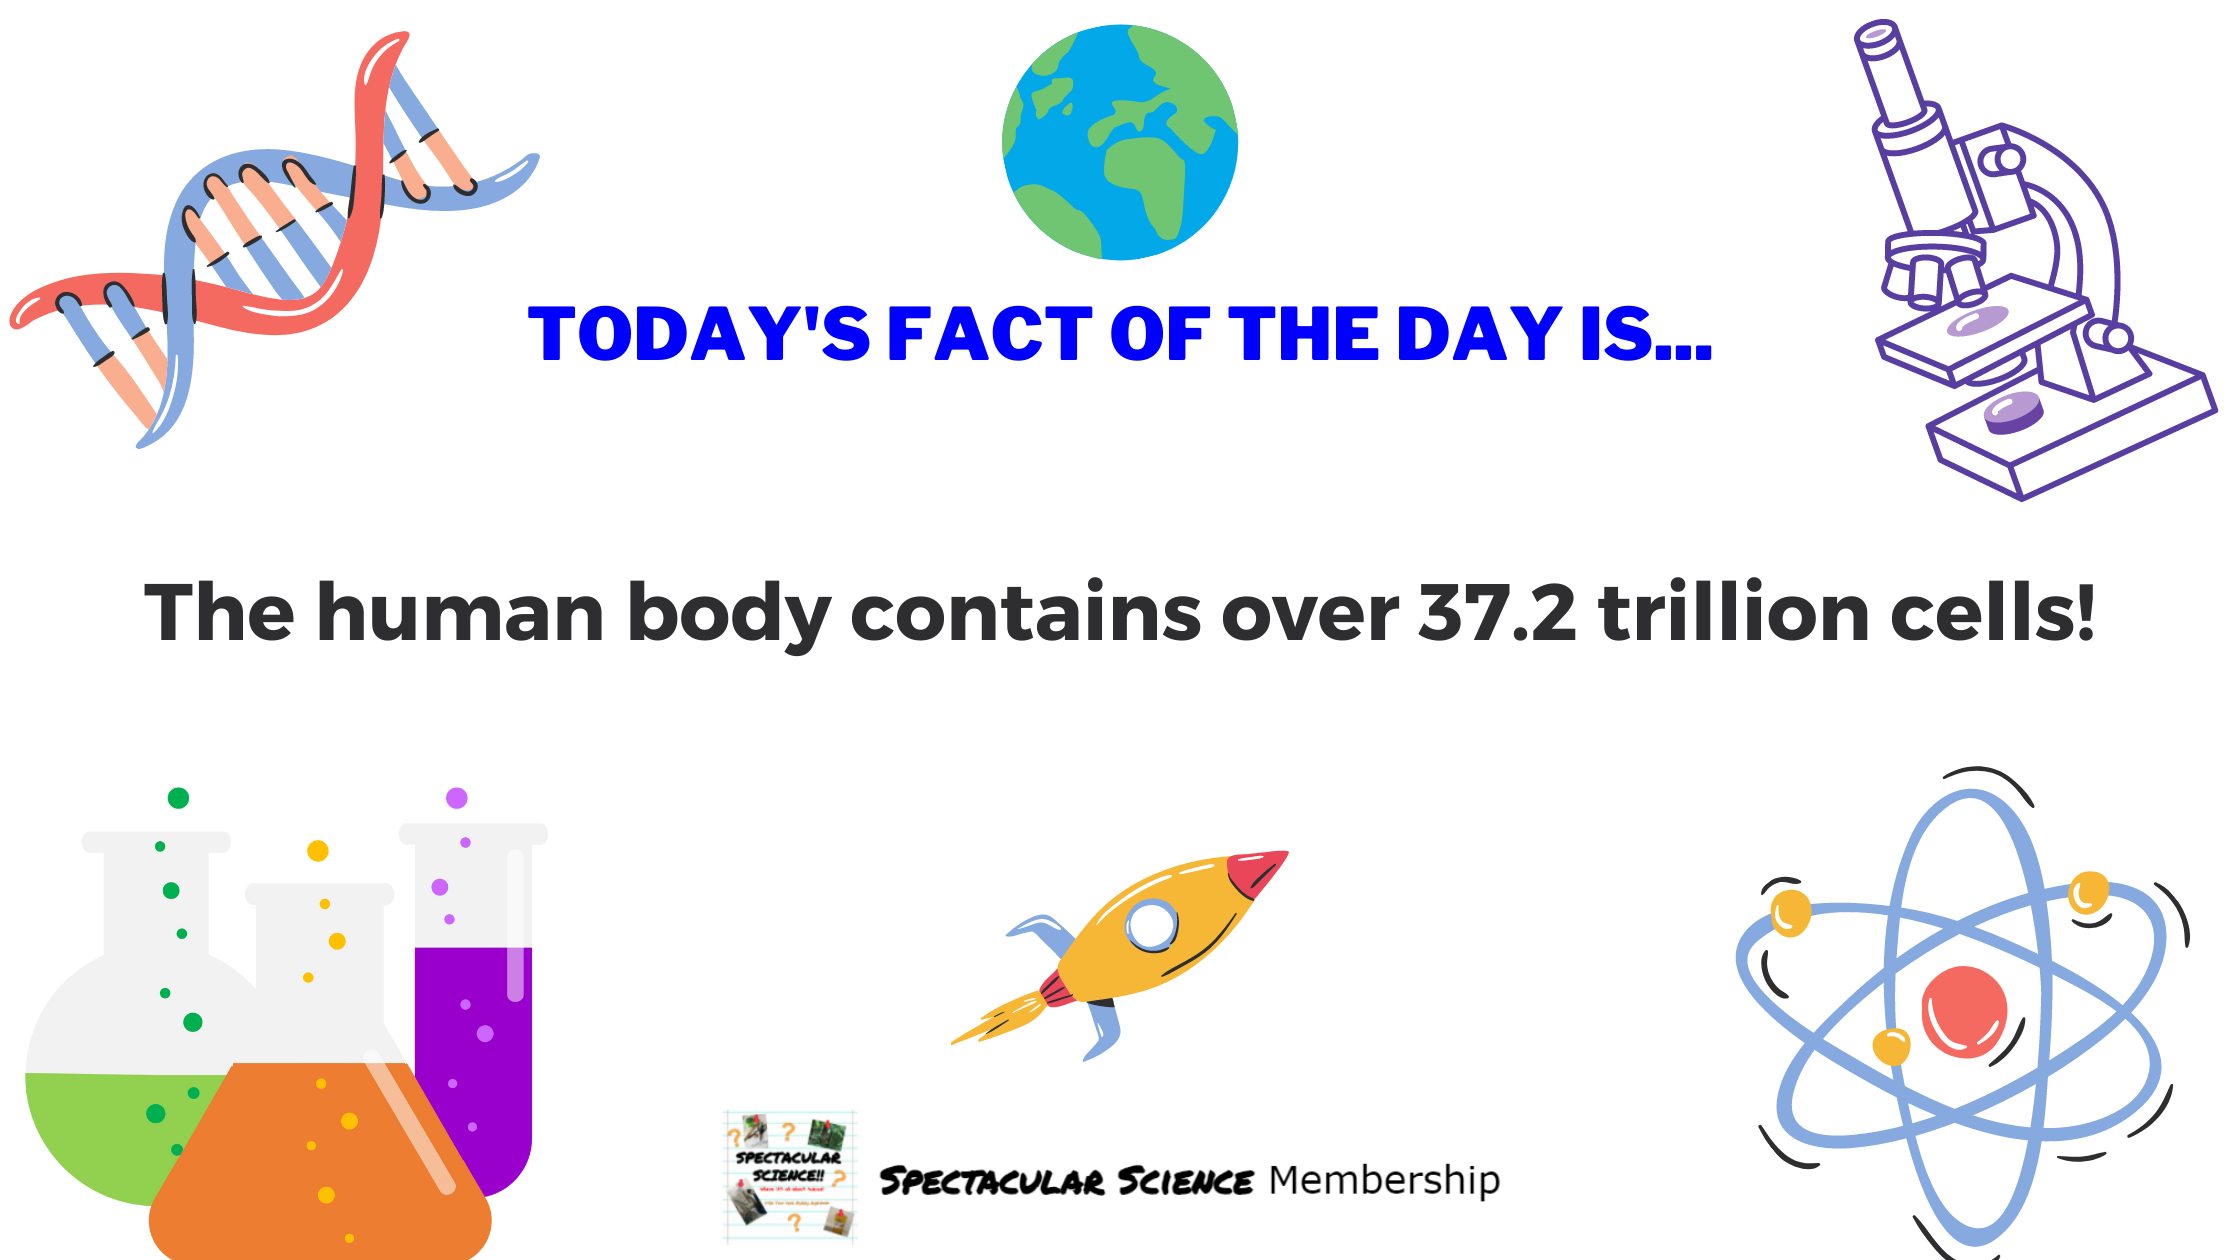 Fact of the Day Image Feb. 27th